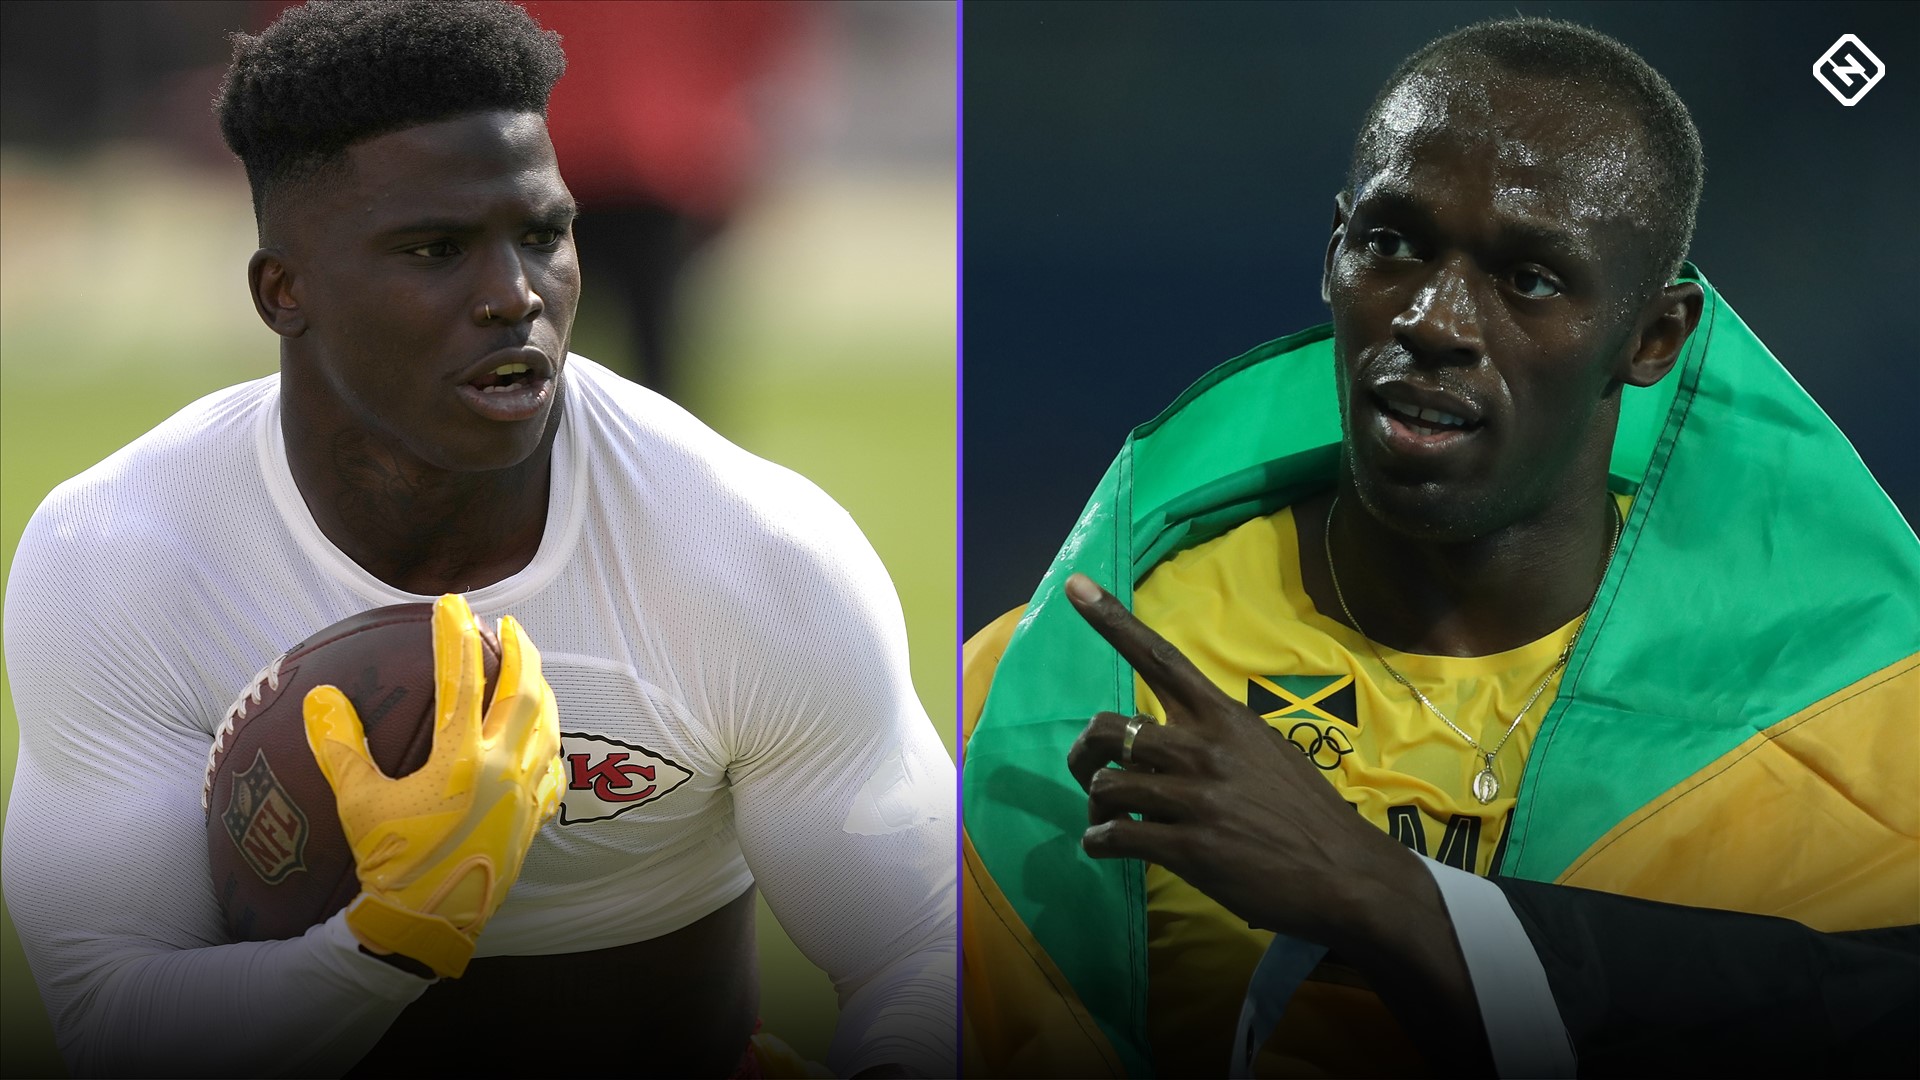 Tyreek Hill vs. Usain Bolt: Are we one step closer to a showdown? | Sporting News